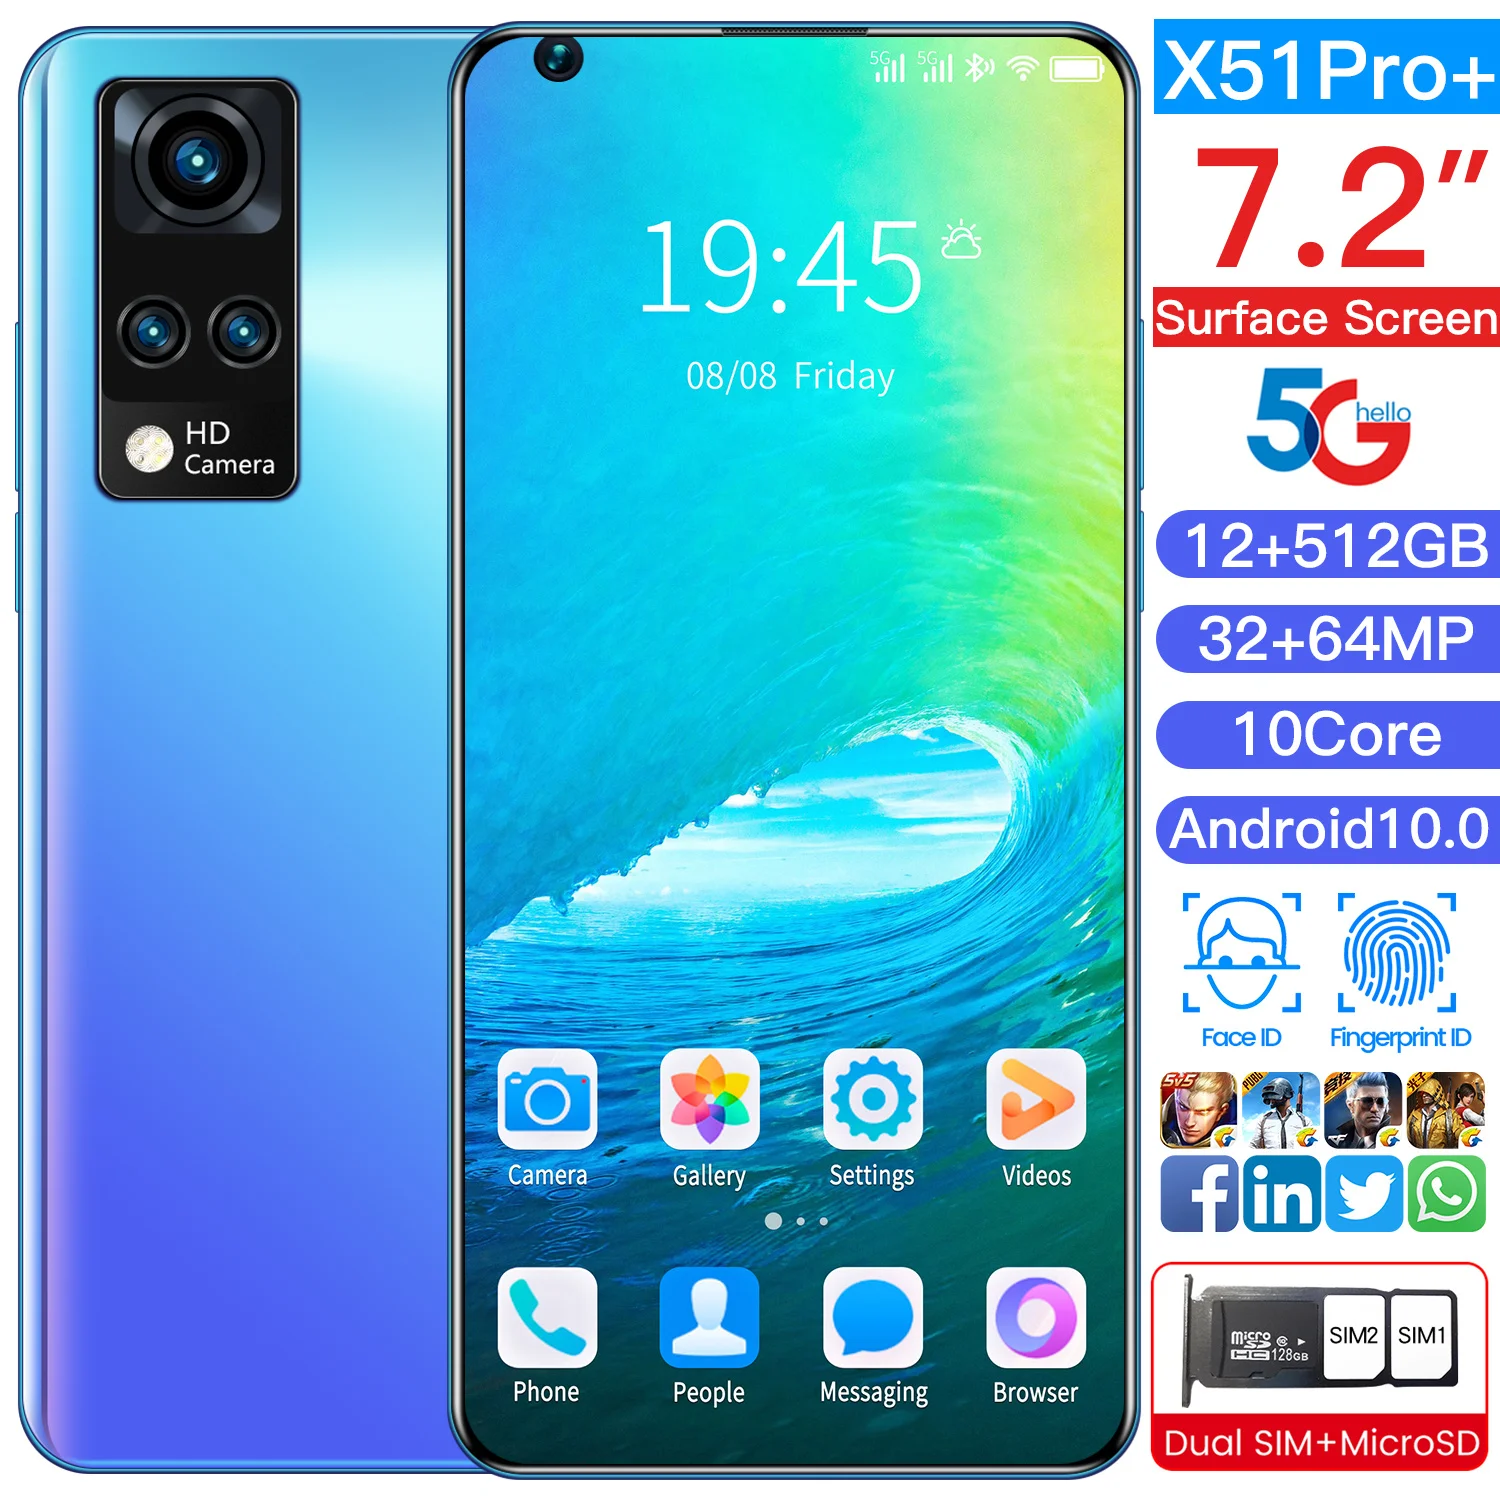 Global Version X51 Pro+ 7.2 Inch Smartphone Android 12GB RAM 512GB ROM Unlocked Mobilephone Celulares Cellphone Mobiles